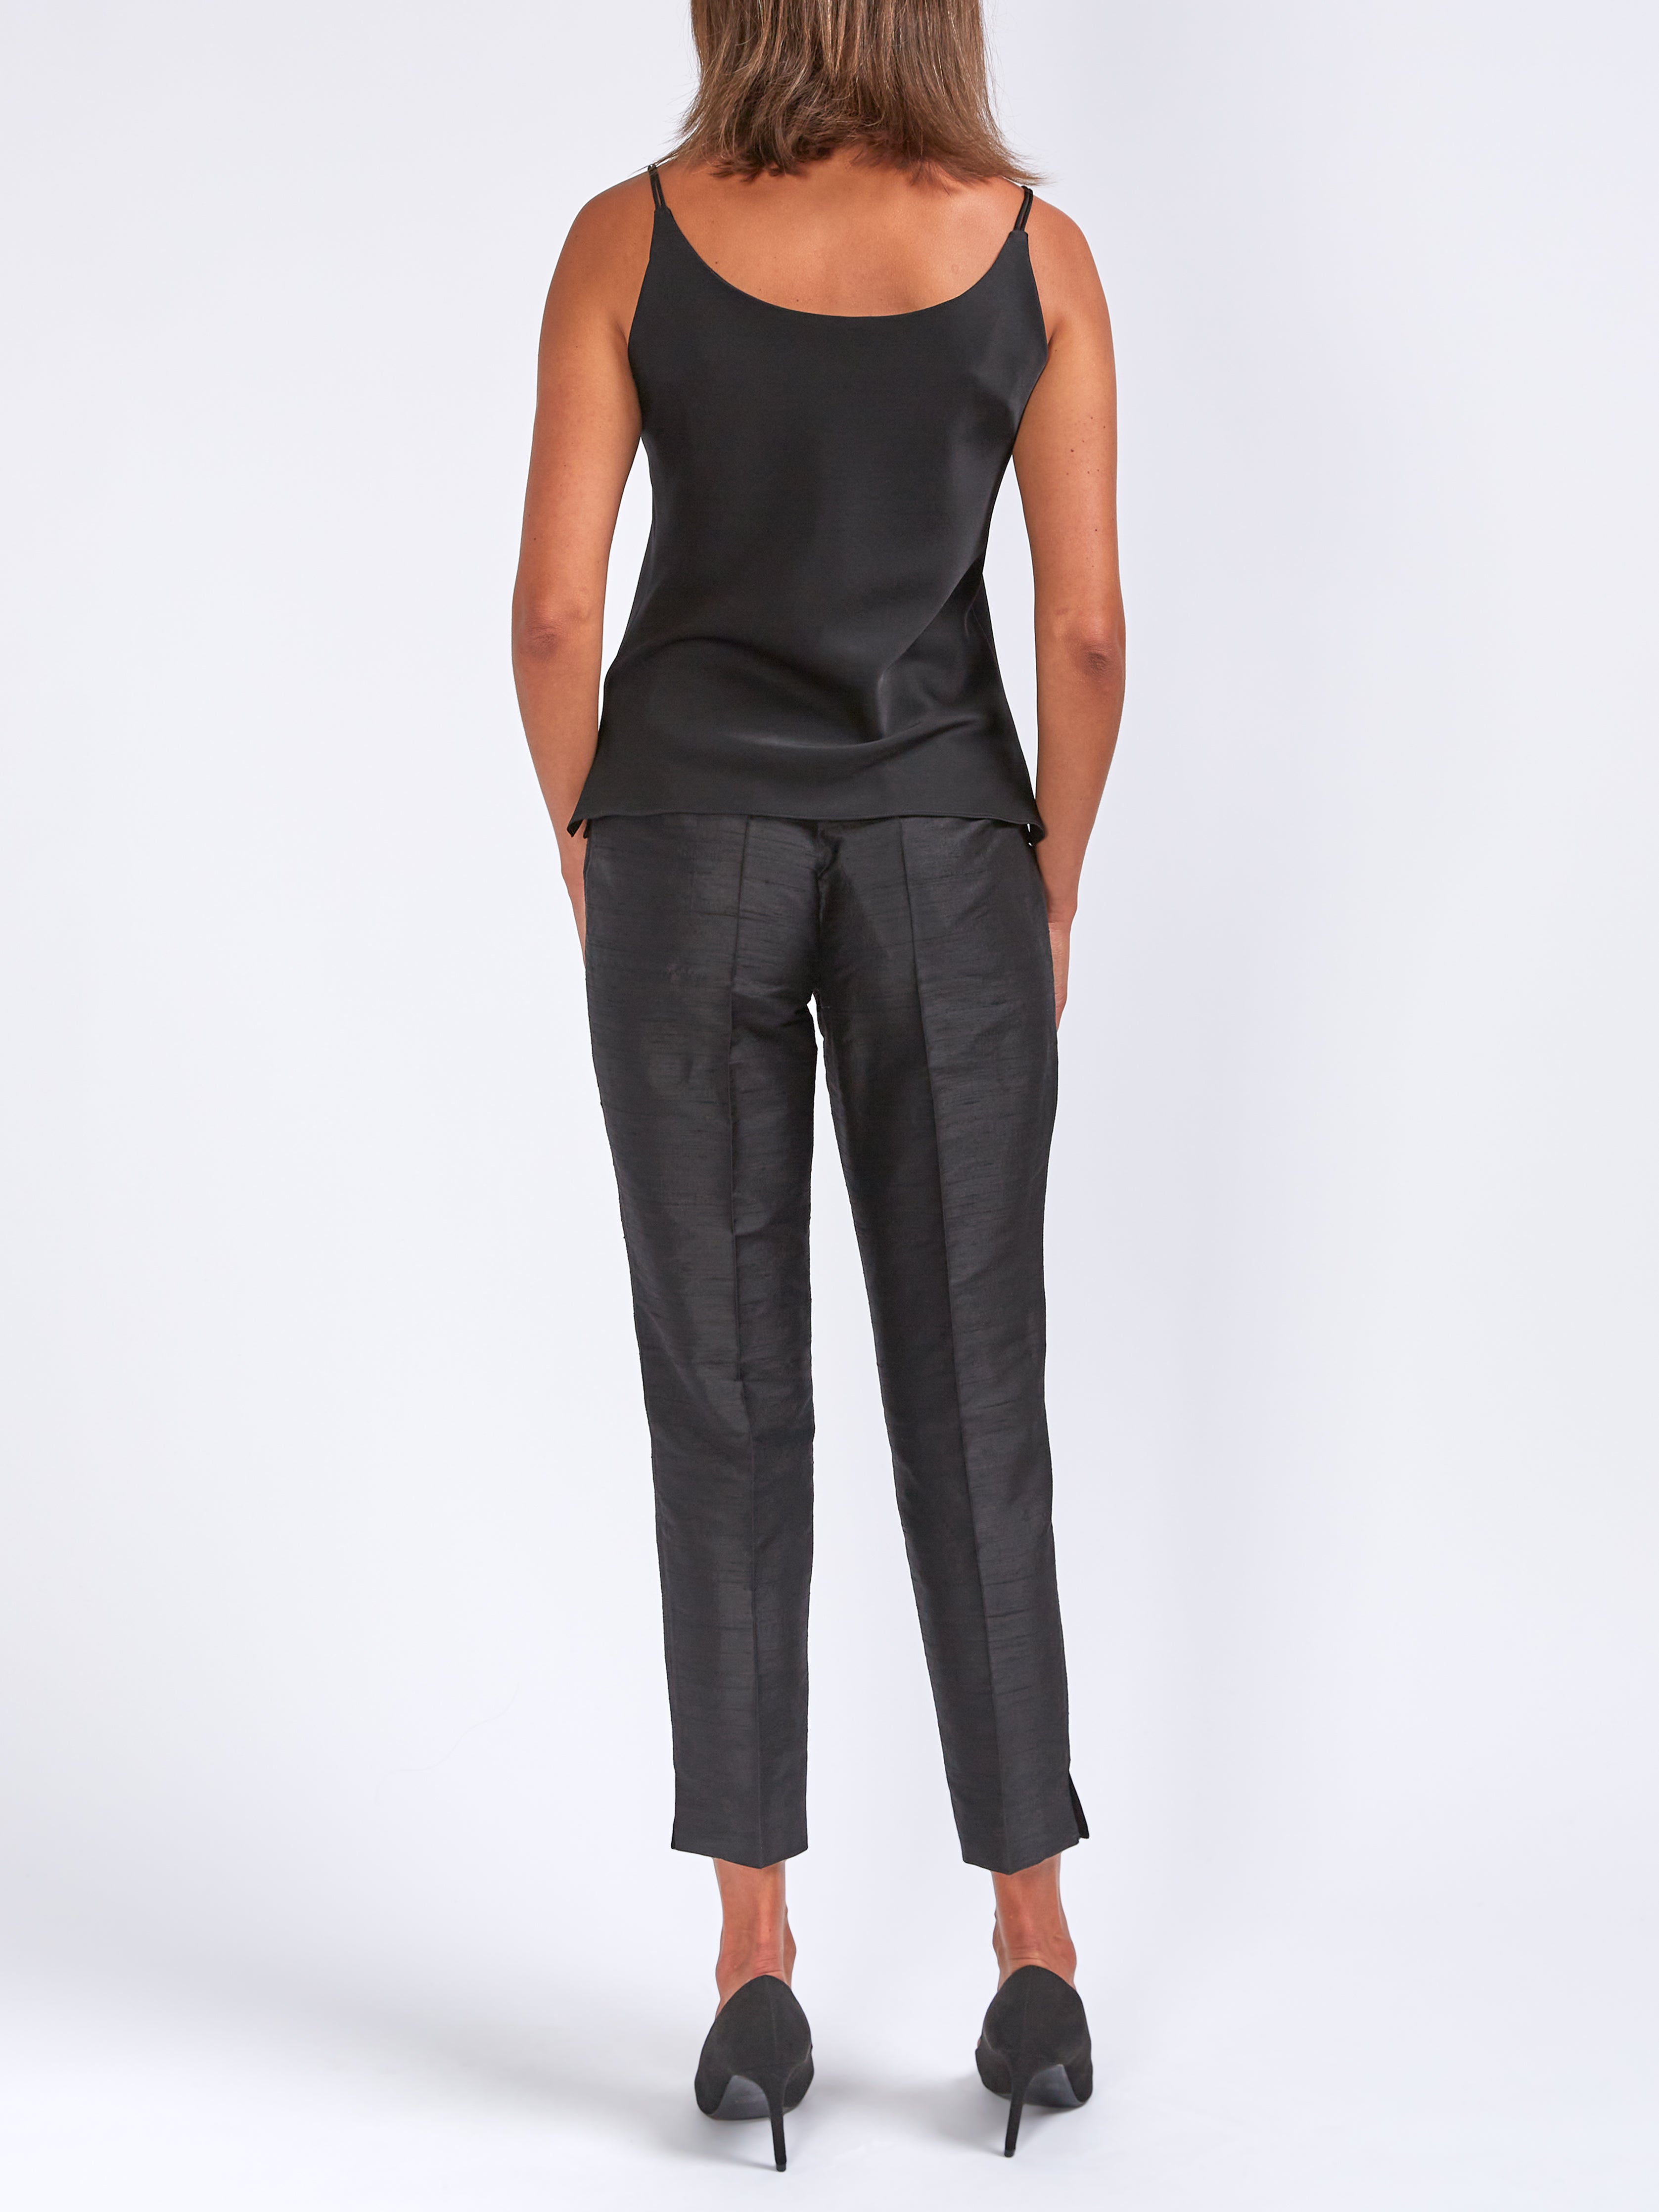 Cigarette Pant (Black) by Bettie Page | Bettie Page